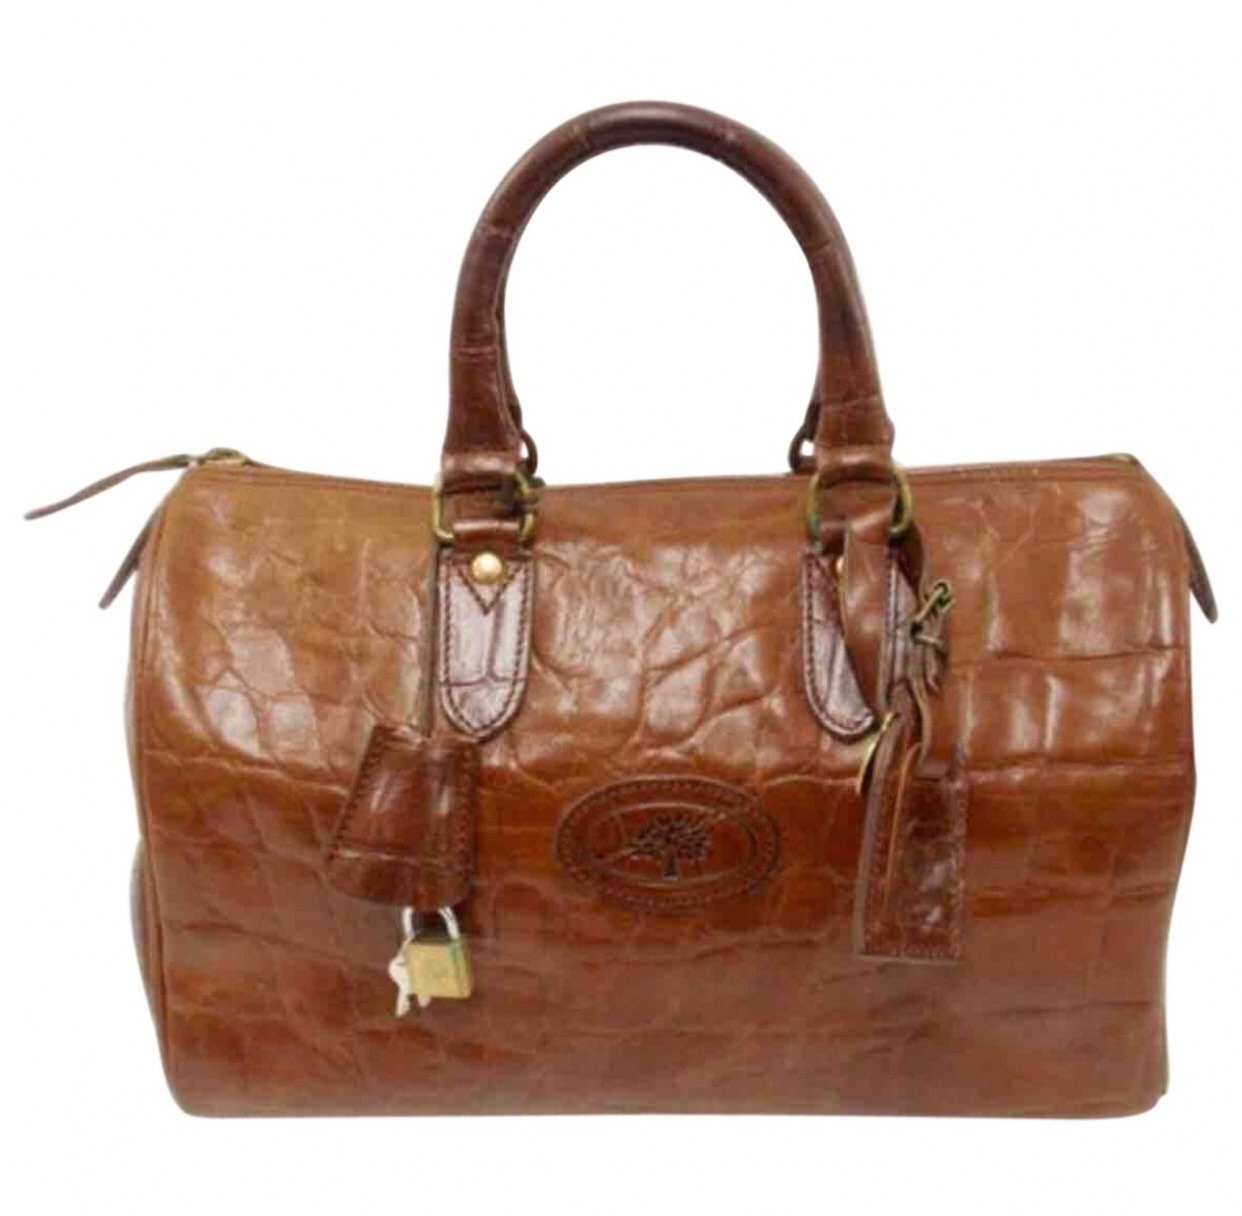 Vintage Mulberry brown croc embossed leather speedy style handbag.Classic purse by Roger Saul. 050320r8